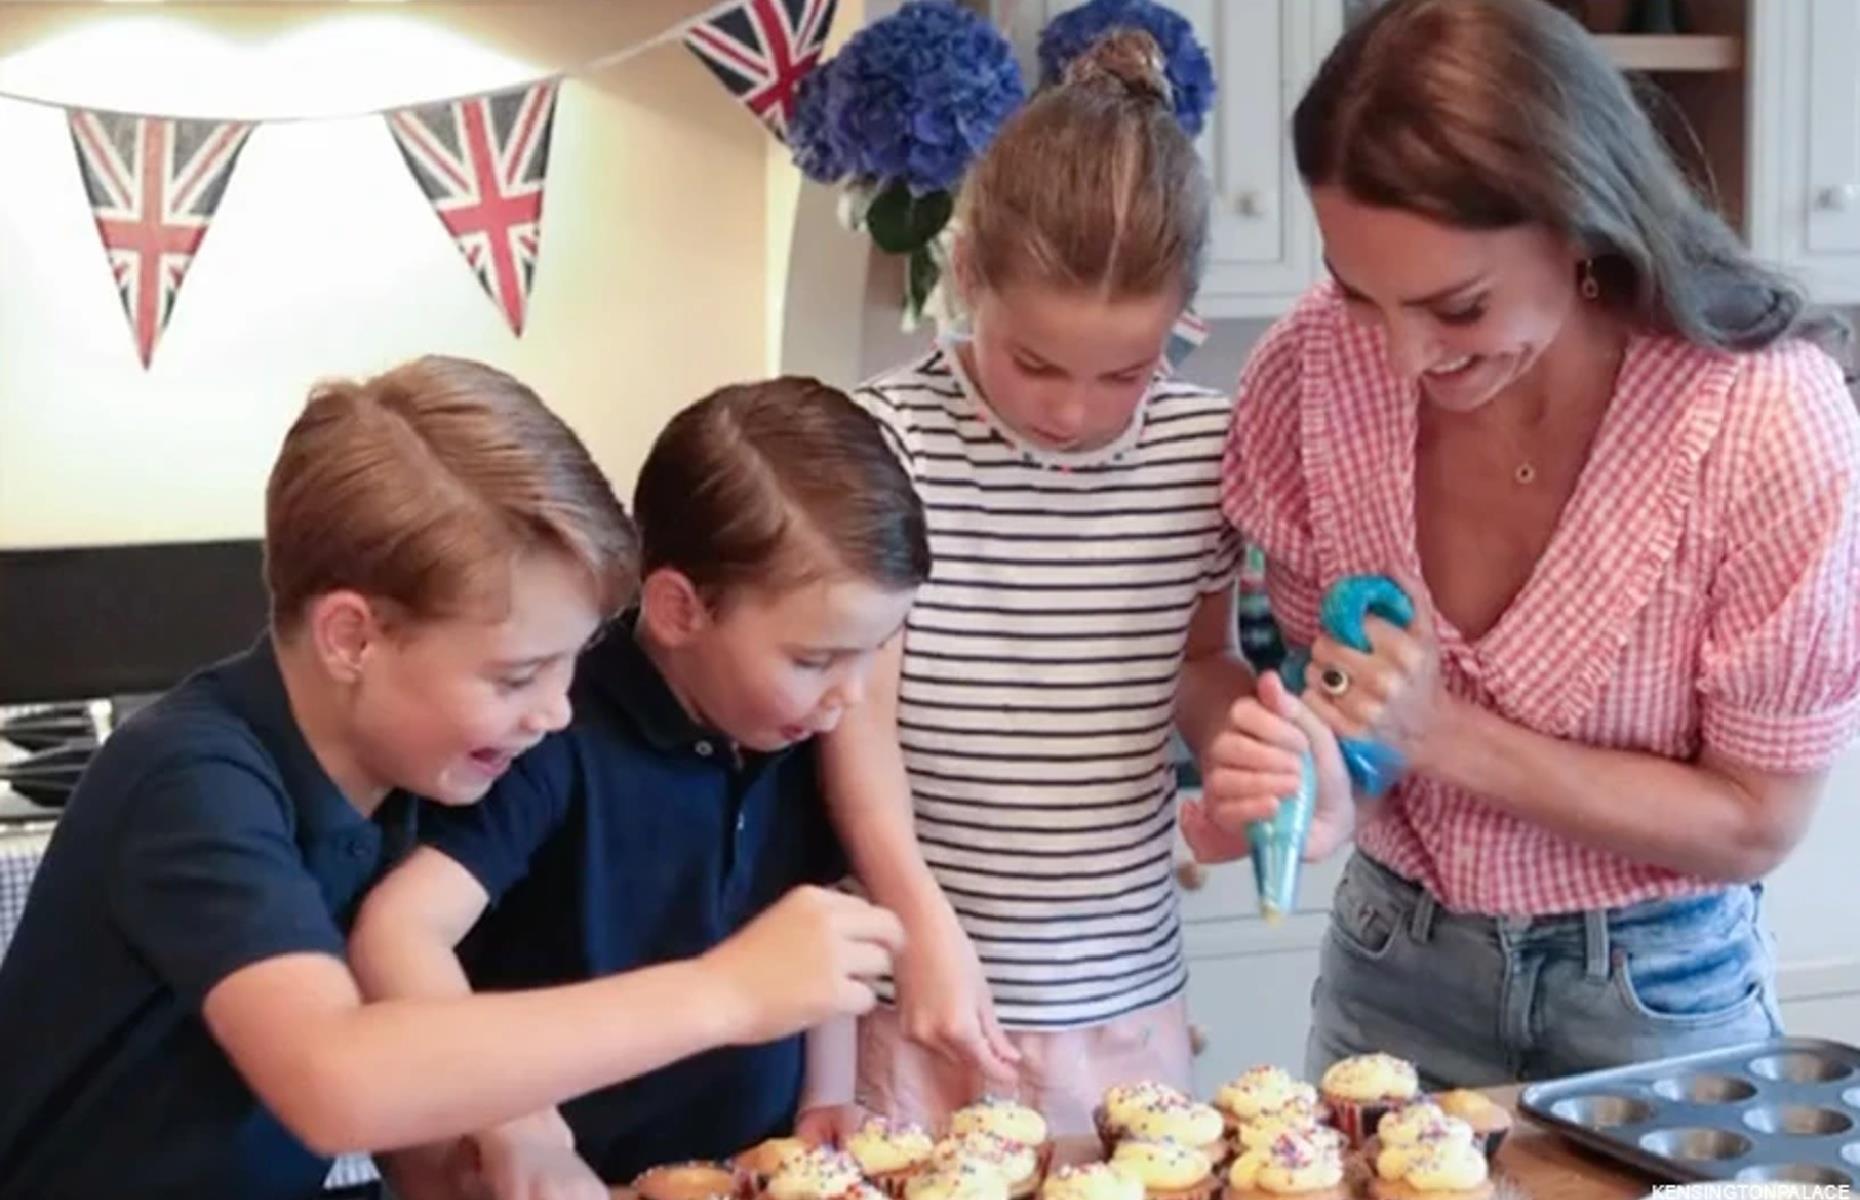 <p>The Princess of Wales, seen here making cupcakes with her children for the Platinum Jubilee, loves baking and always makes the kids' birthday cakes. She told baking legend Mary Berry during an appearance on her BBC show: "I love making the cake. It's become a bit of a tradition that I stay up until midnight with ridiculous amounts of cake mix and icing and I make far too much. But I love it."</p>  <p><a href="https://www.lovefood.com/galleries/138255/food-and-drink-king-charles-and-the-royal-family-wont-touch?page=1"><strong>Now discover food and drink the royal family won't touch</strong></a></p>